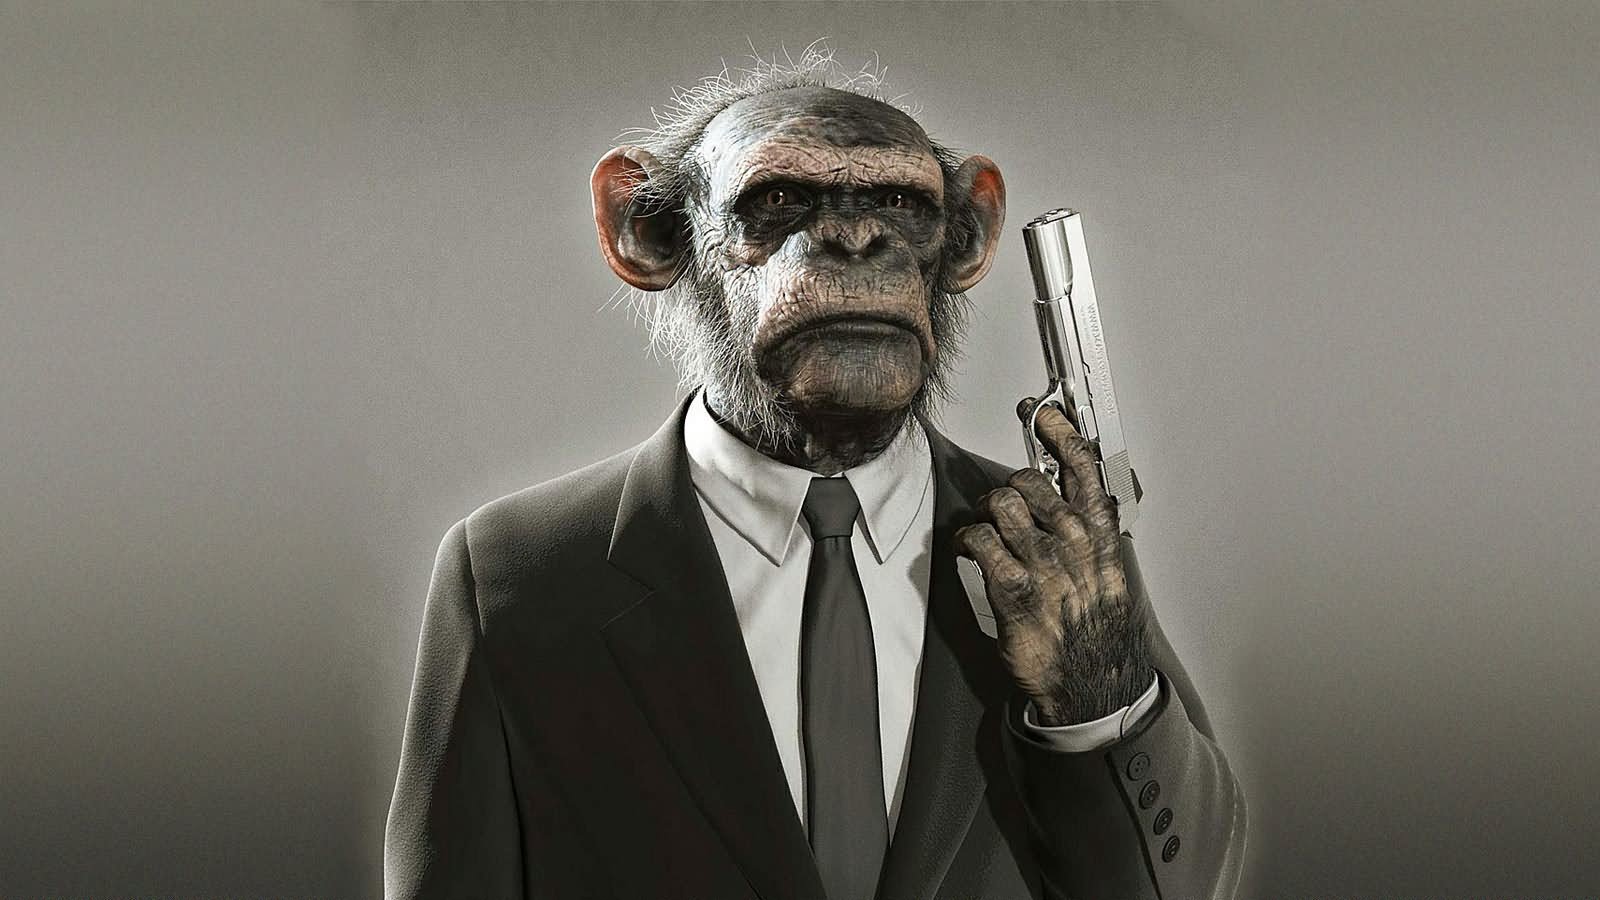 Funny Monkey In Suit With Gun